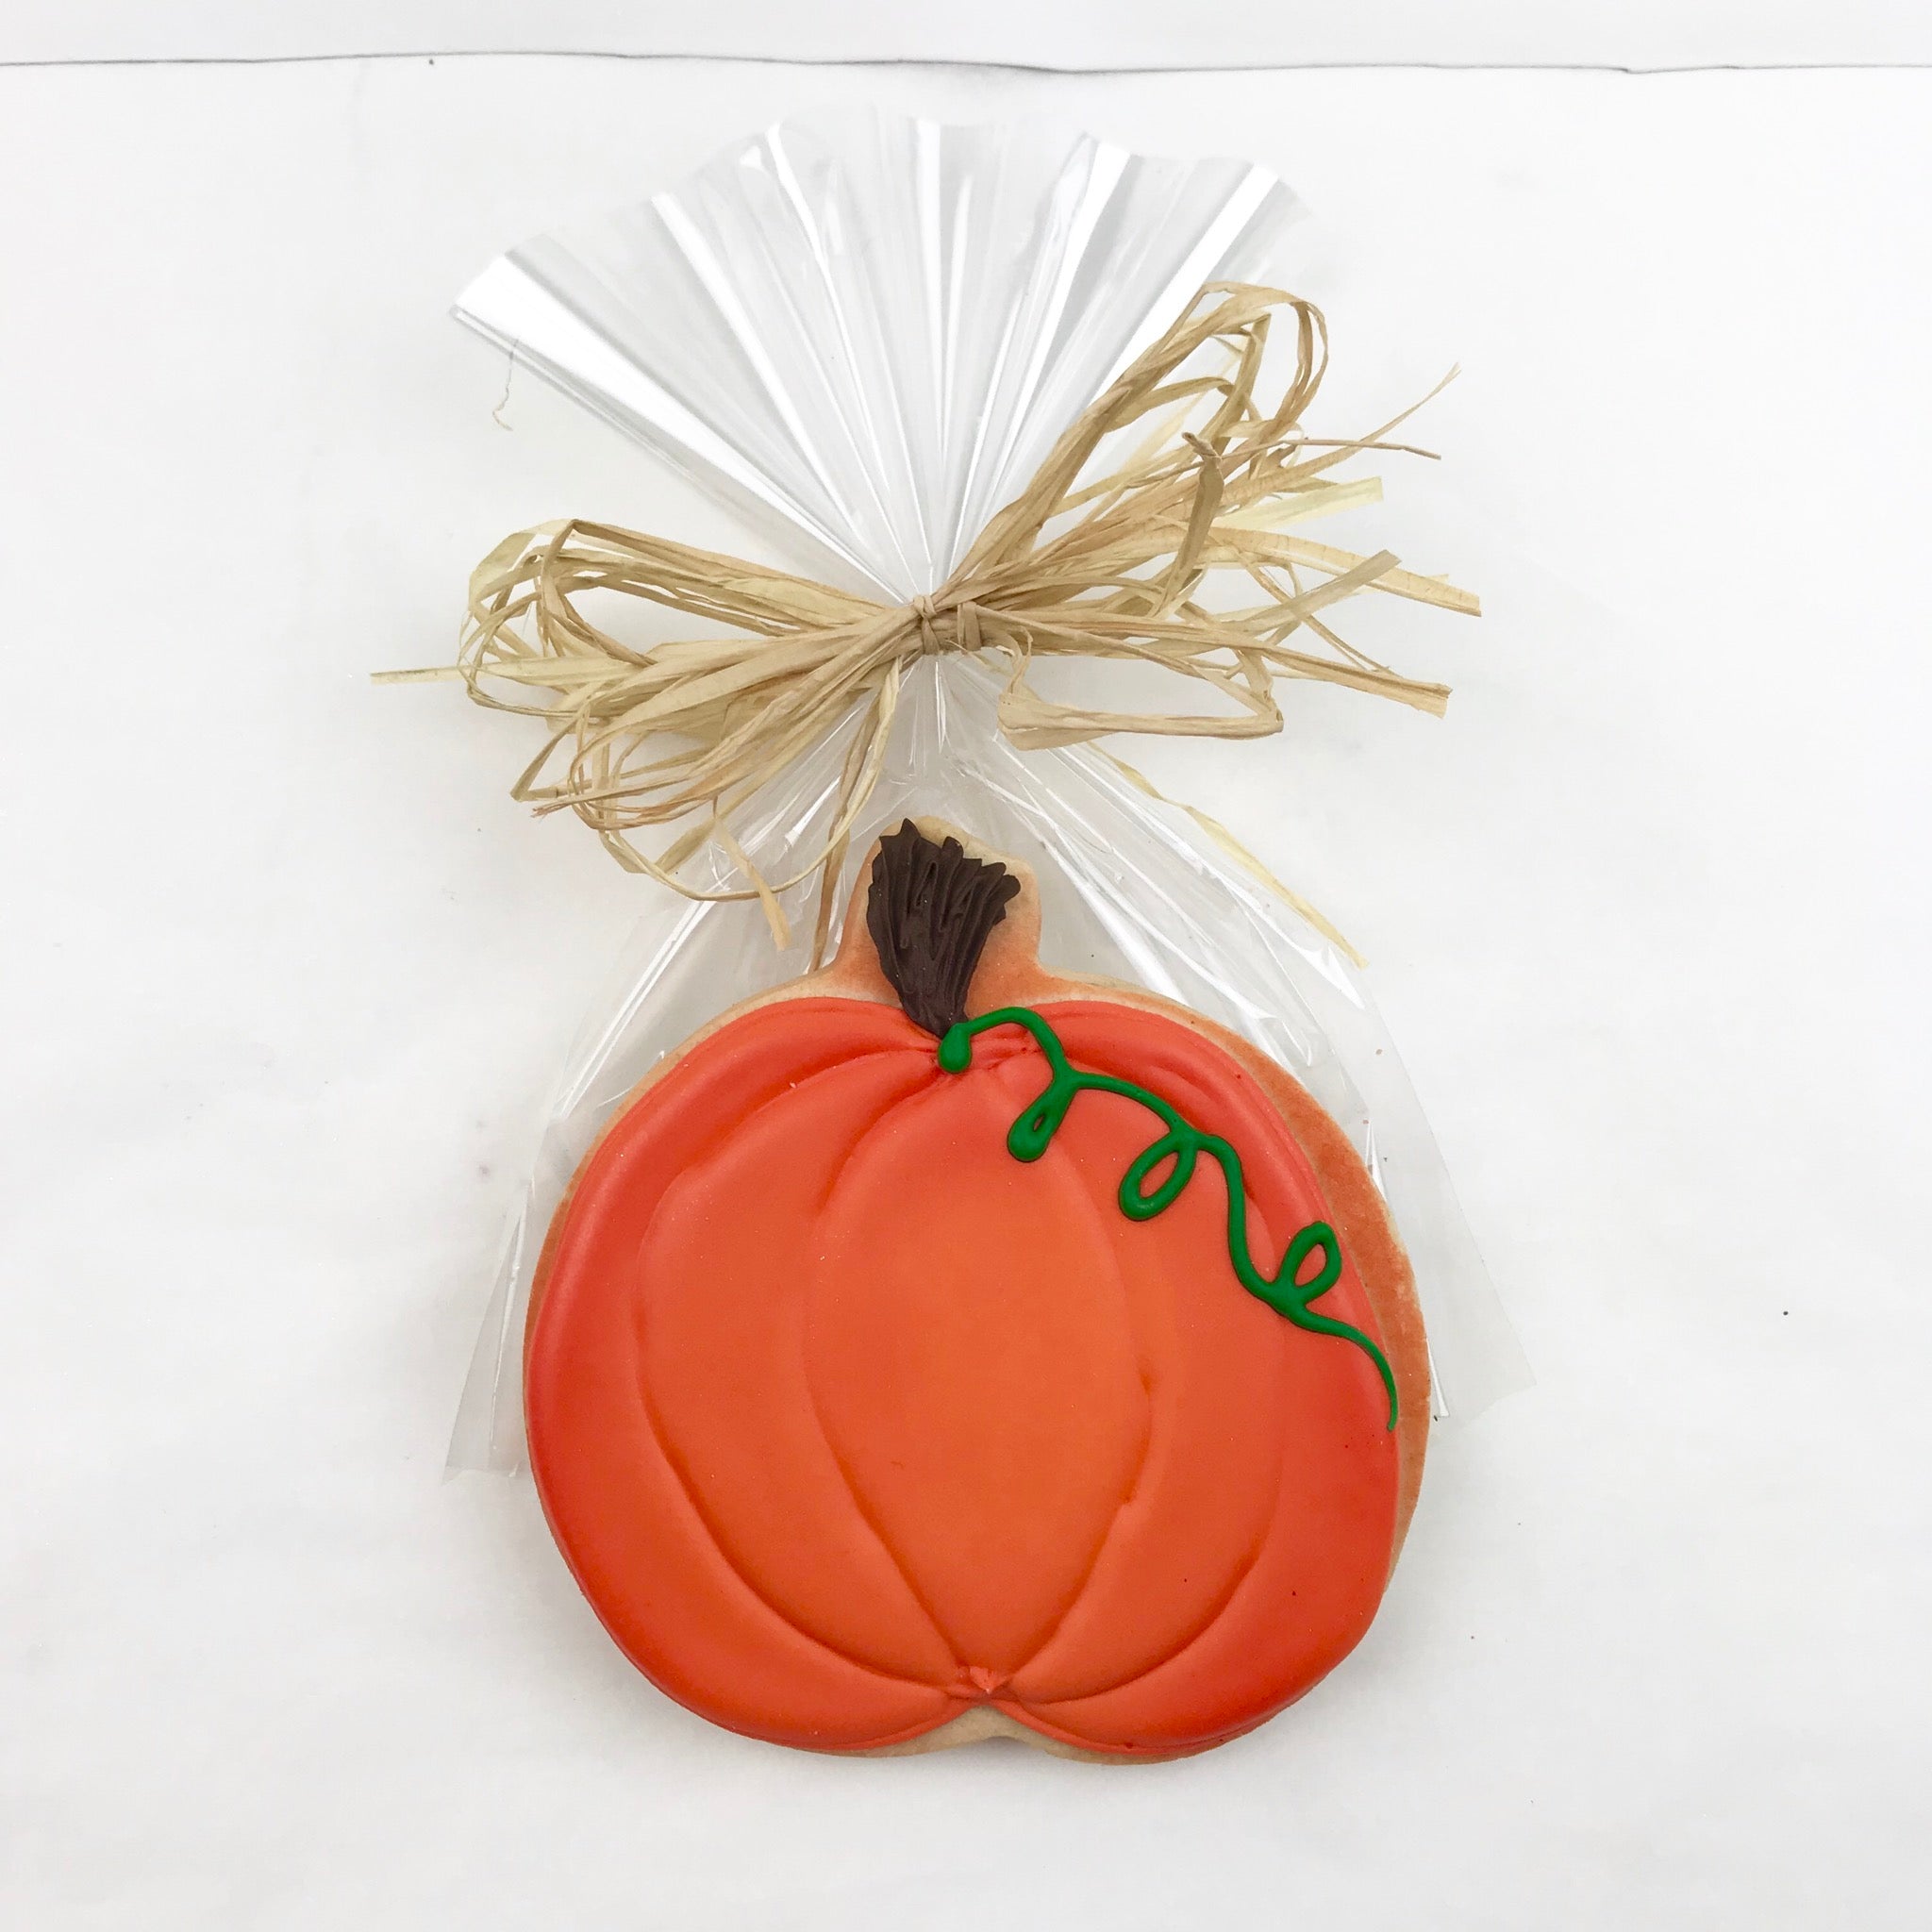 Orange Pumpkin Sugar Cookie, 4” wrapped in cellophane with a ribbon